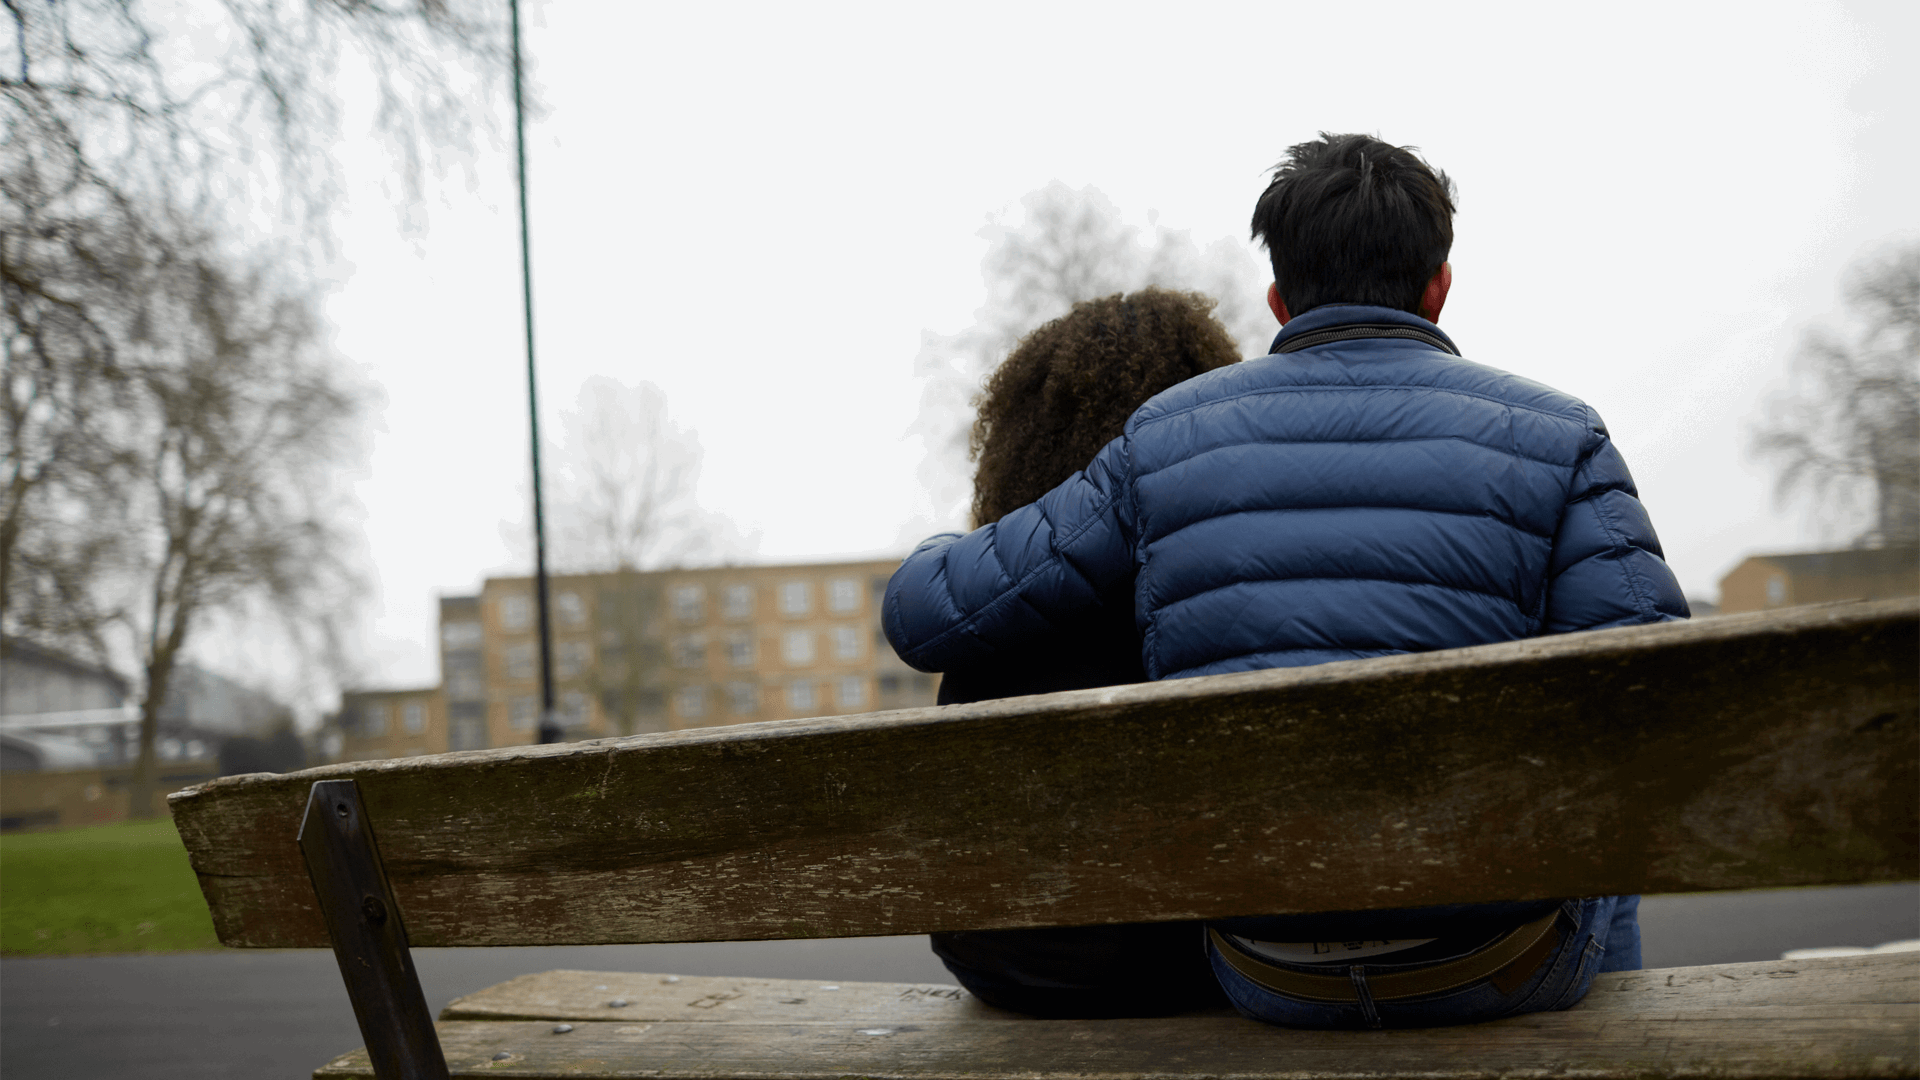 backshot-of-a-boy-with-arms-around-a-girl-while-sitting-on-a-bench-in-a-park-with-a-gloomy-sky-on-background